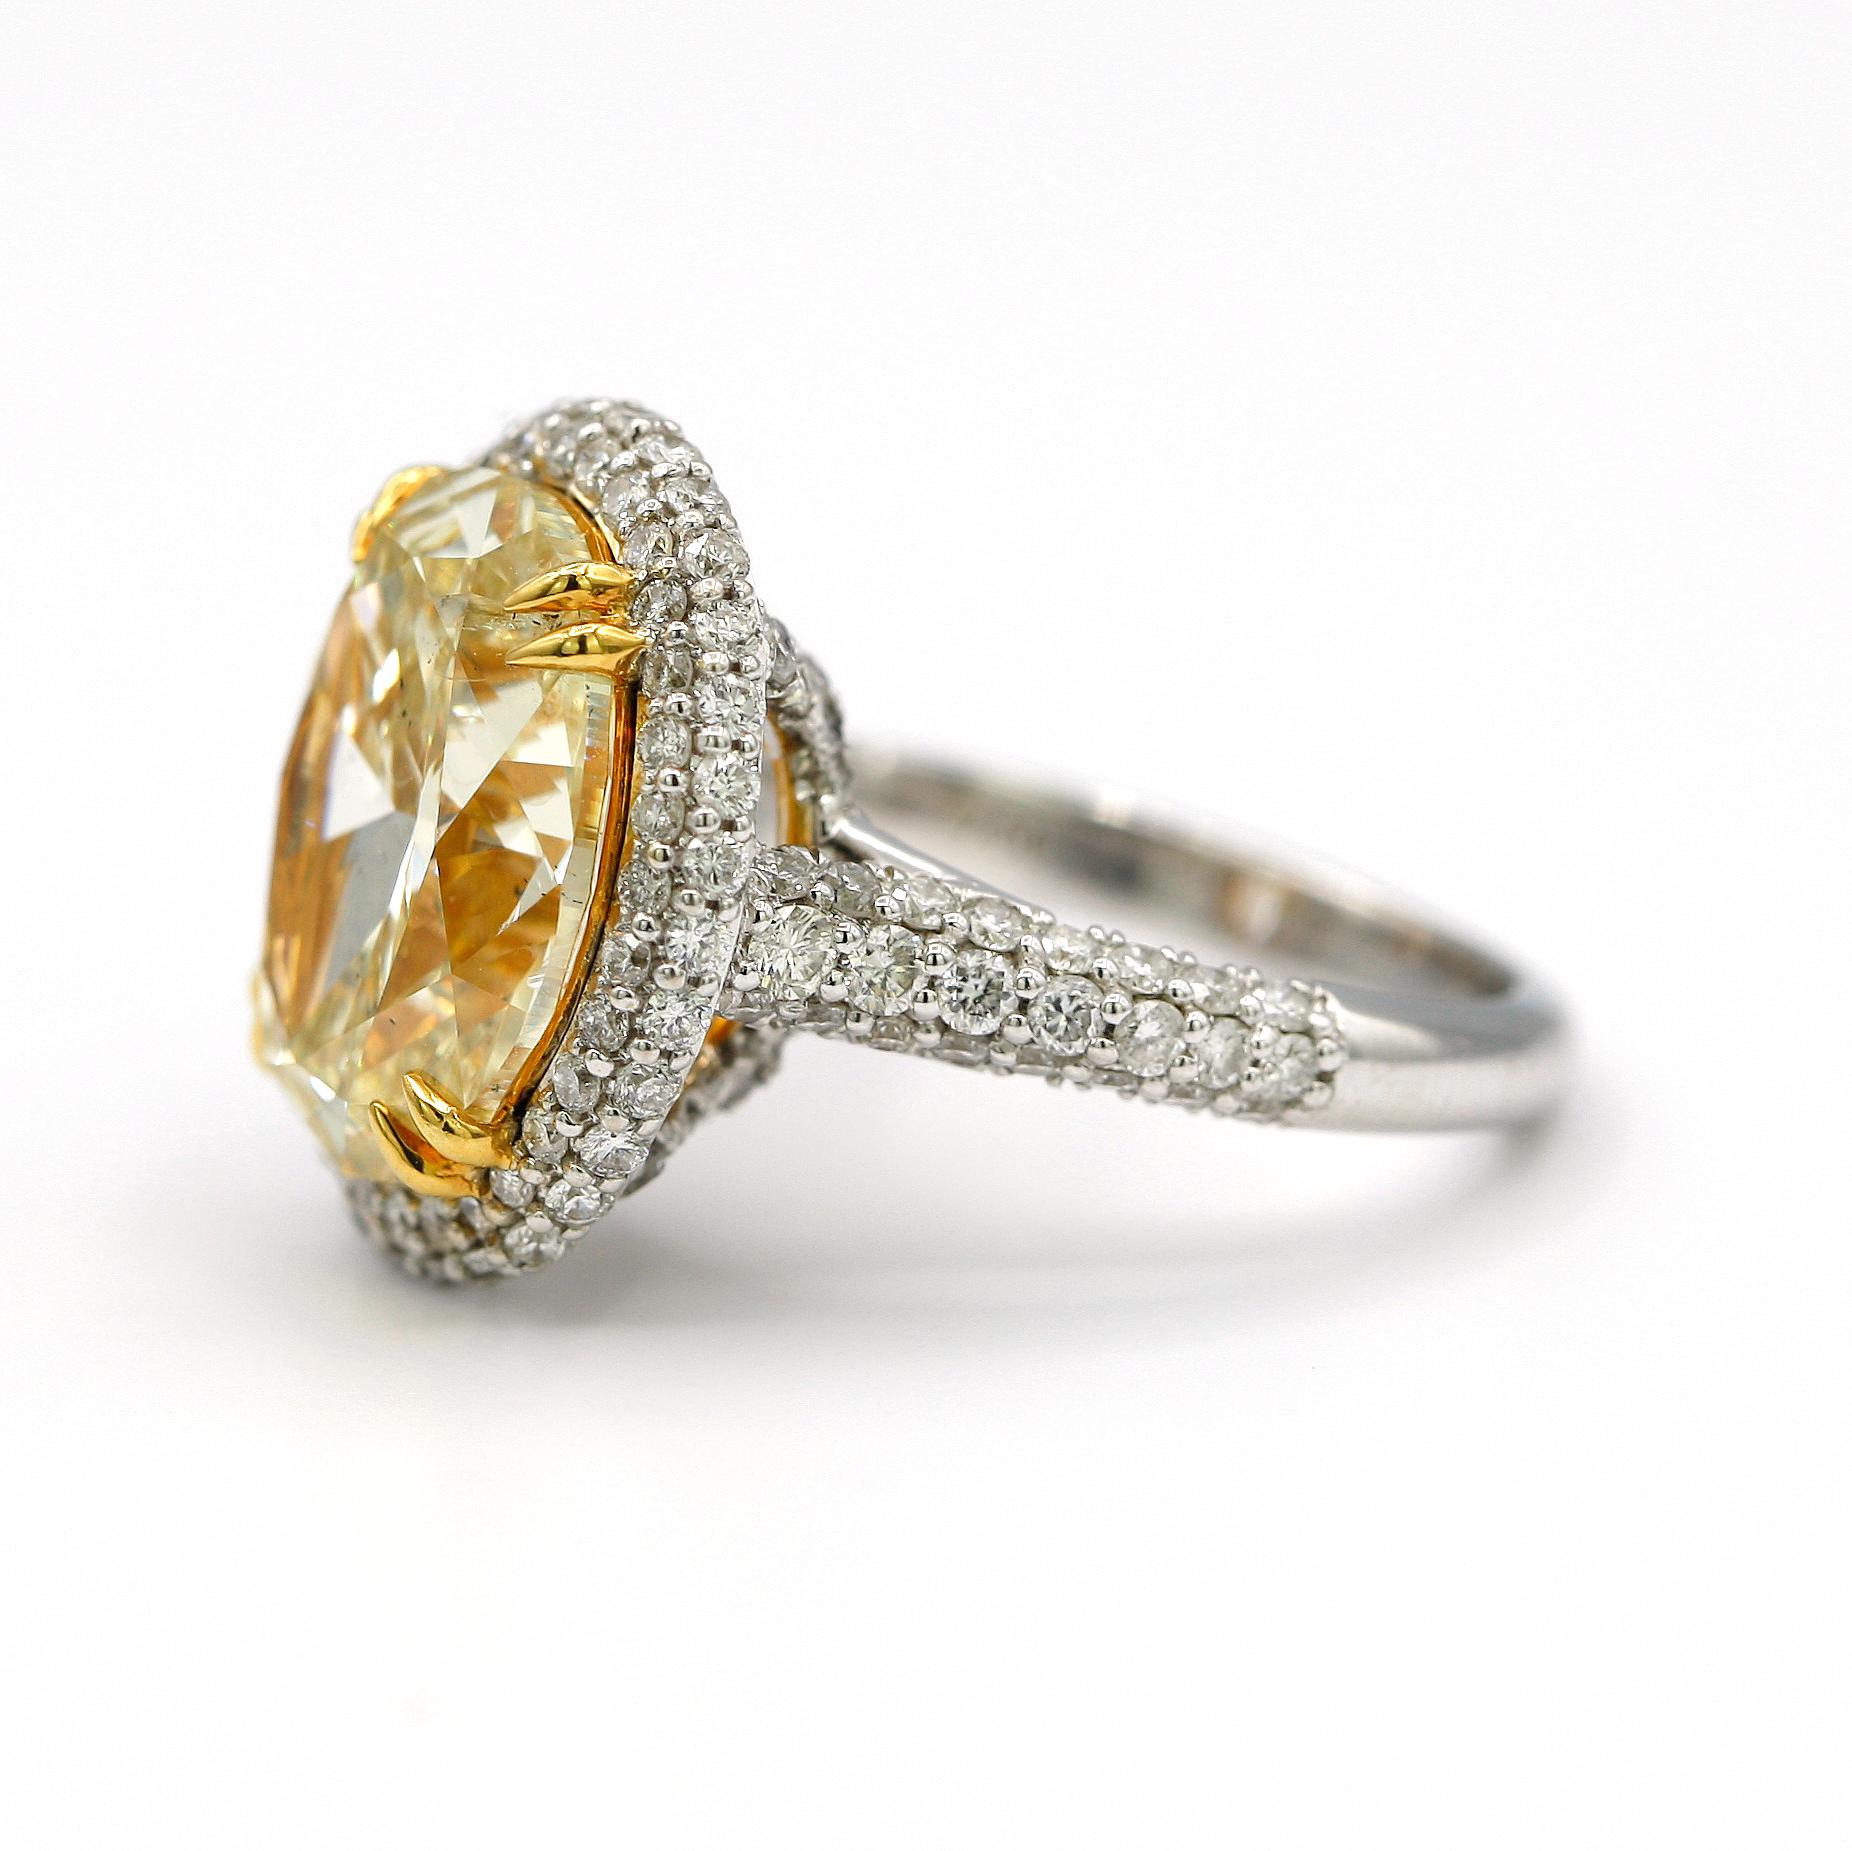 This marvelous ring has a center stone of 7.36 Carat EGL Certified Fancy Light Yellow Oval SI2, along with 1.48 Carat Pave Diamonds placed along the border of the center stone.
Mounted in 18K White Gold.
Ring Size 6